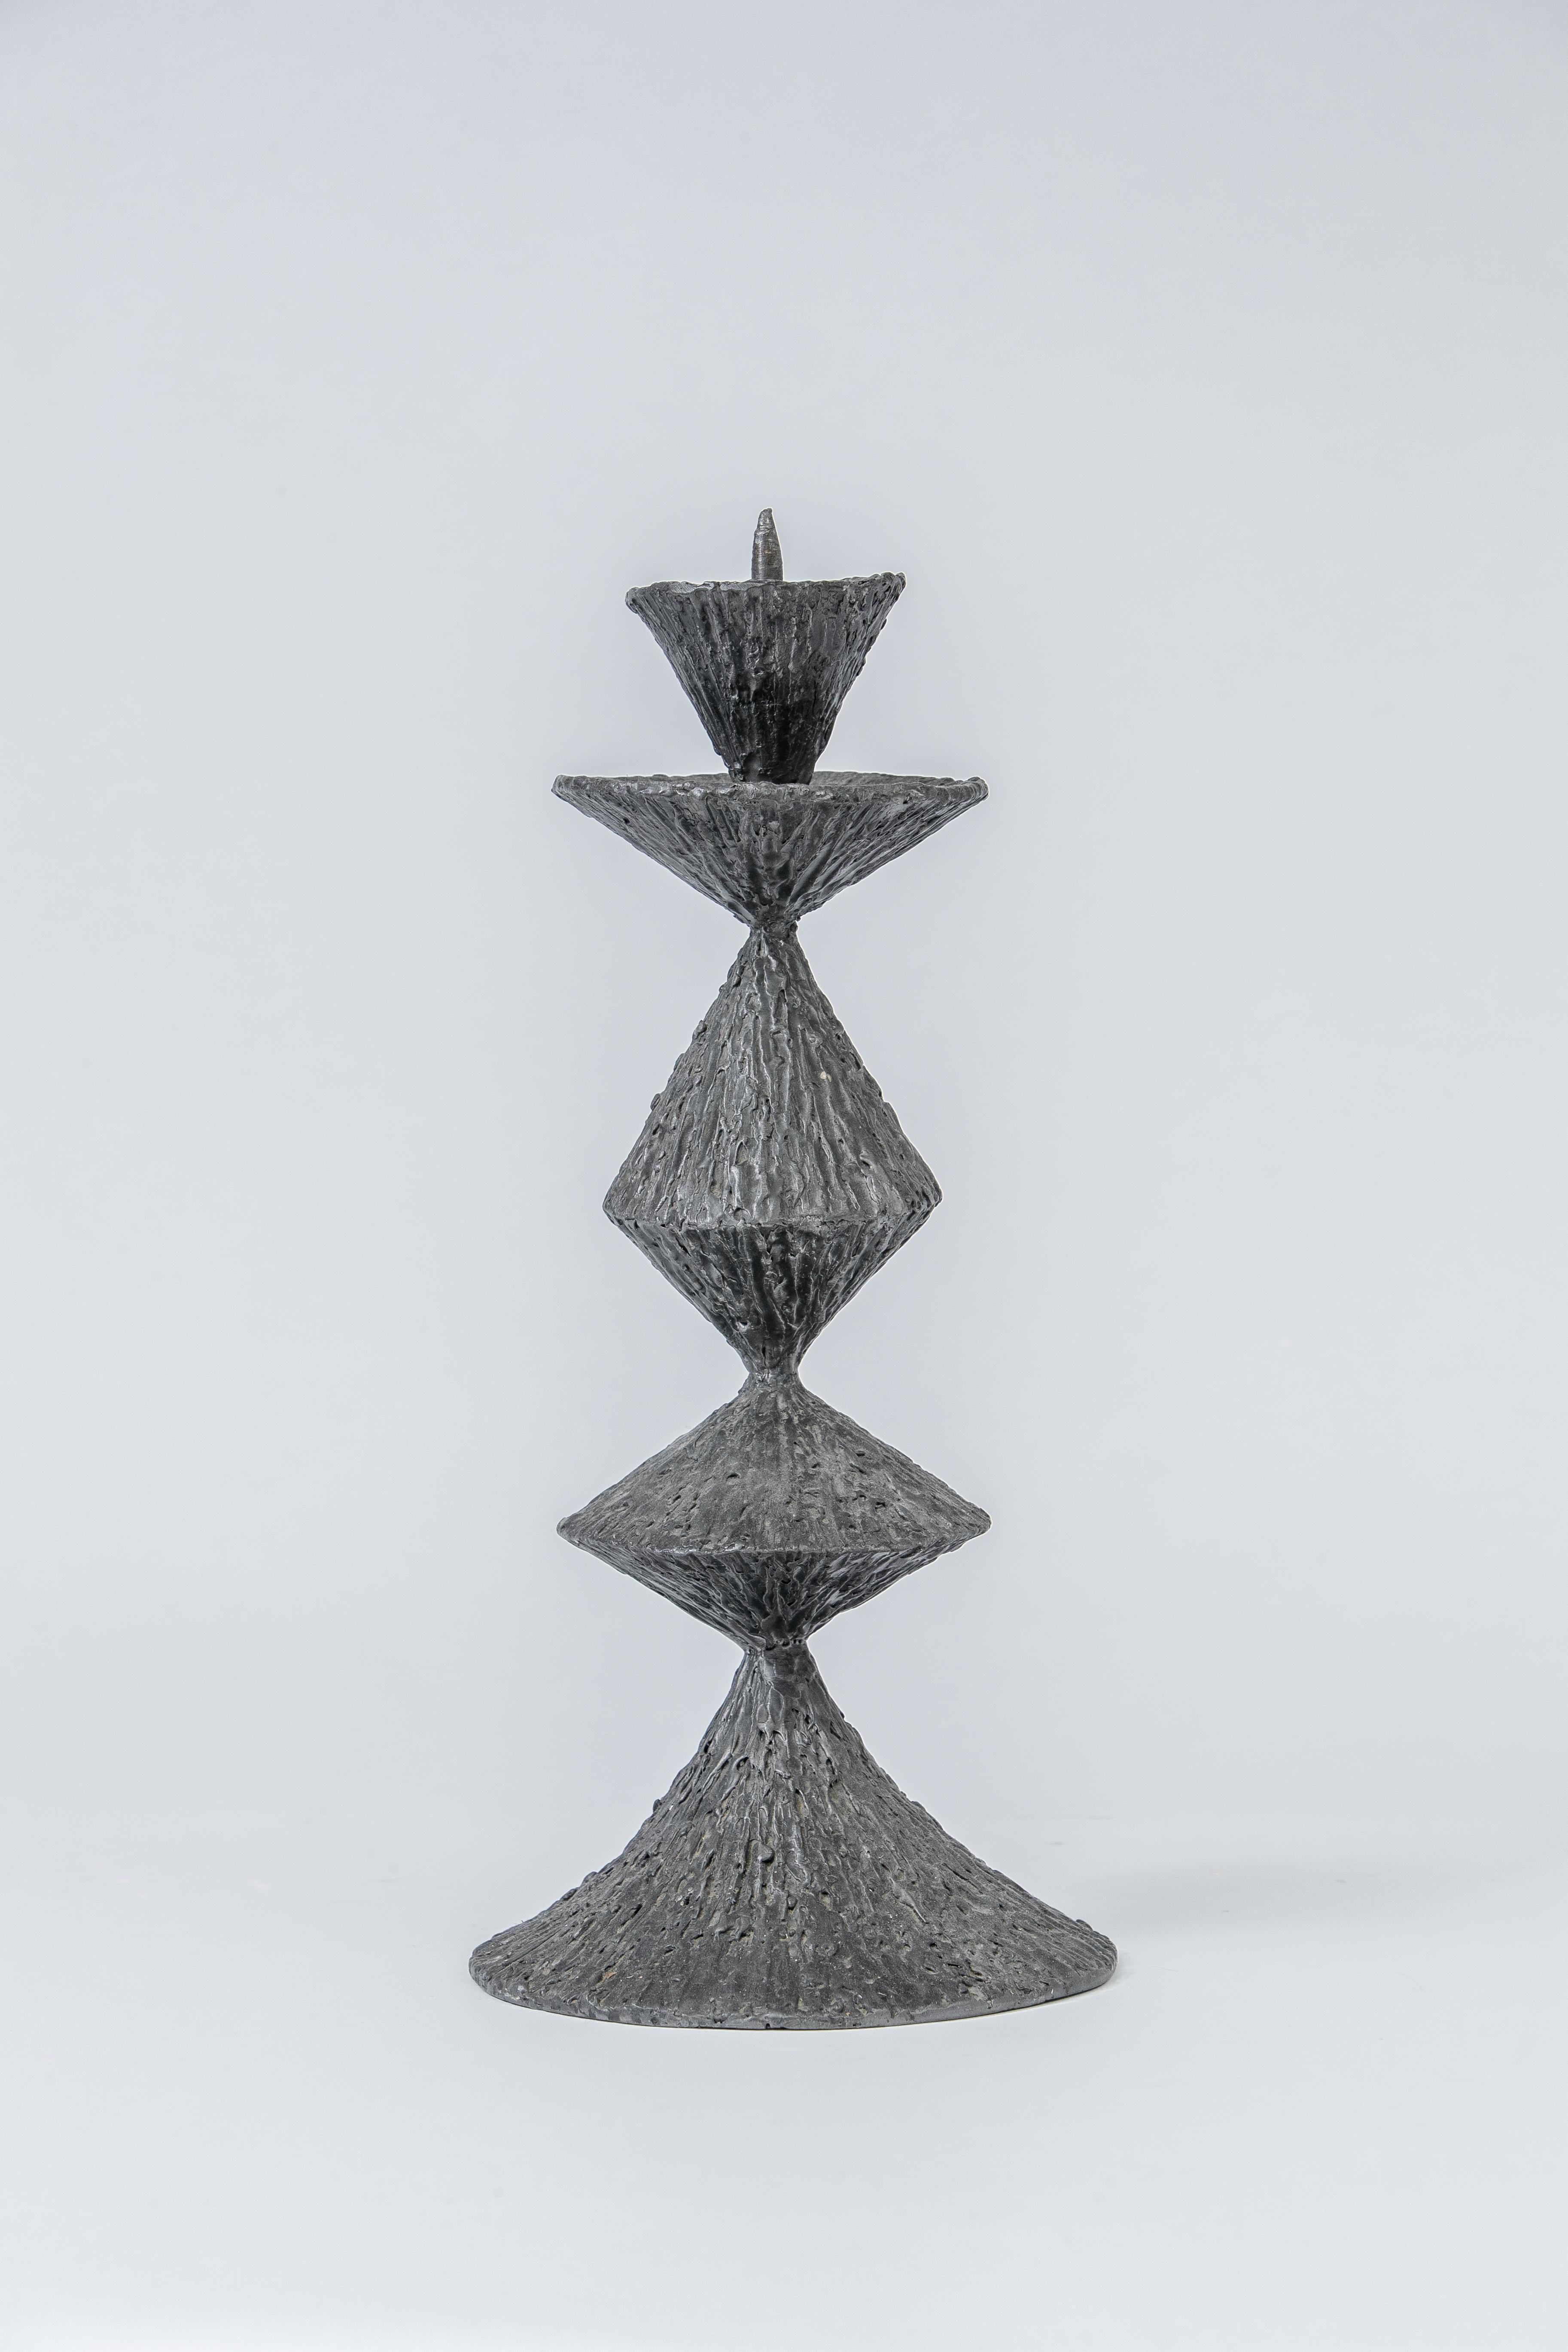 A large Brutalist candlestick in pewter, reminiscent of Giacometti's work, its surface mimics candle drips.